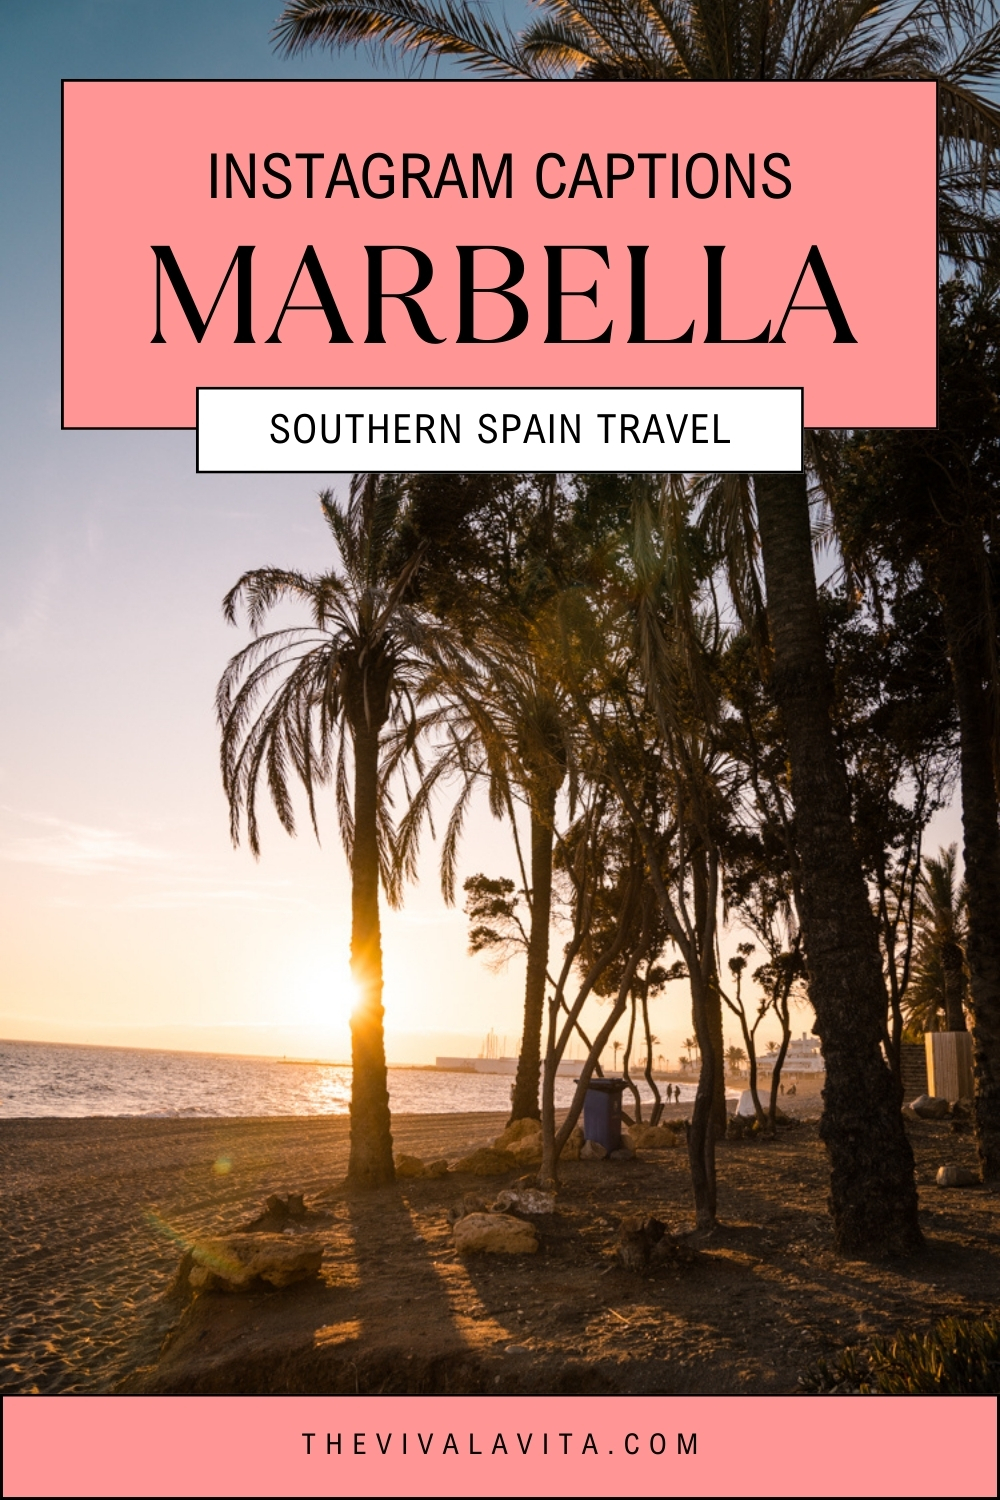 image of a beach in Marbella, in Southern Spain, with the headline: instagram captions marbella, southern spain travel